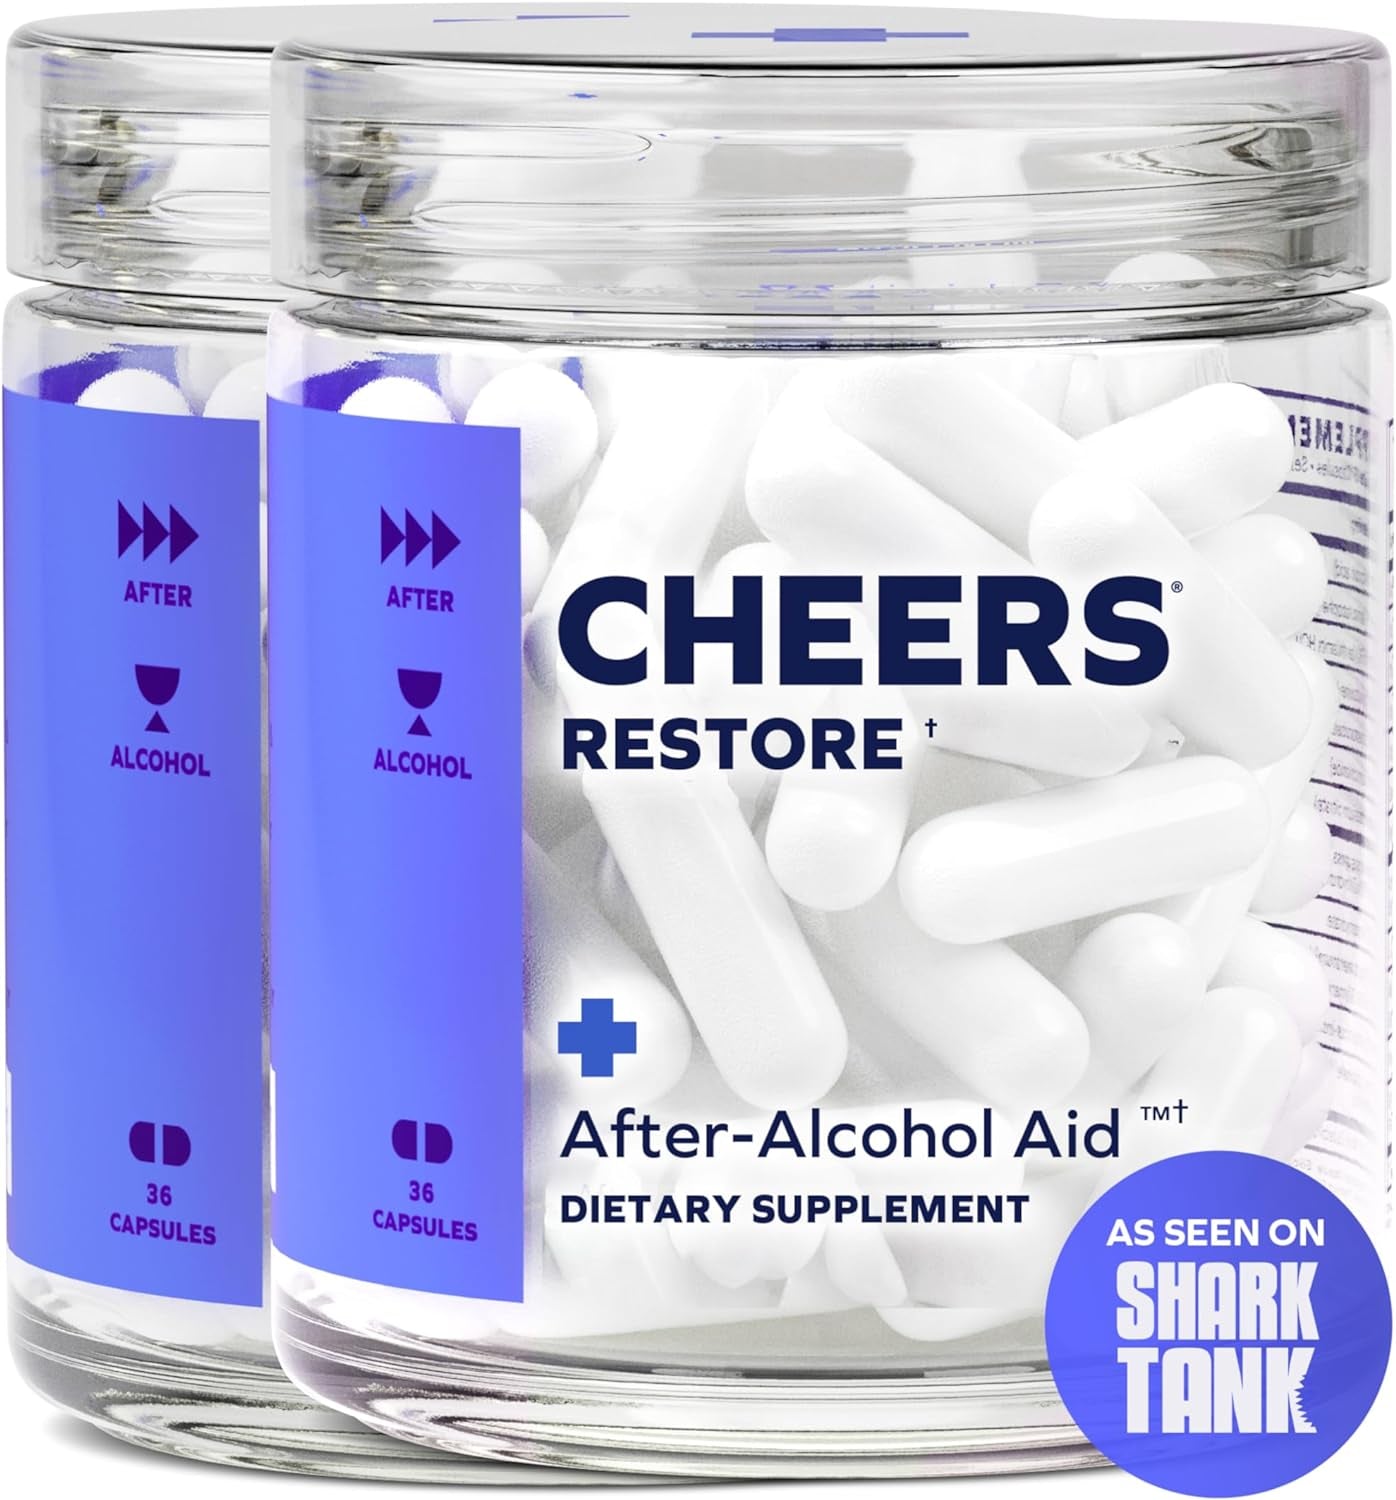 Restore | Supplement with DHM + L-Cysteine | Feel Better after Drinking & Support Your Liver | 12 Doses | Dihydromyricetin, Cysteine, Prickly Pear, B-Vitamins, Ginger